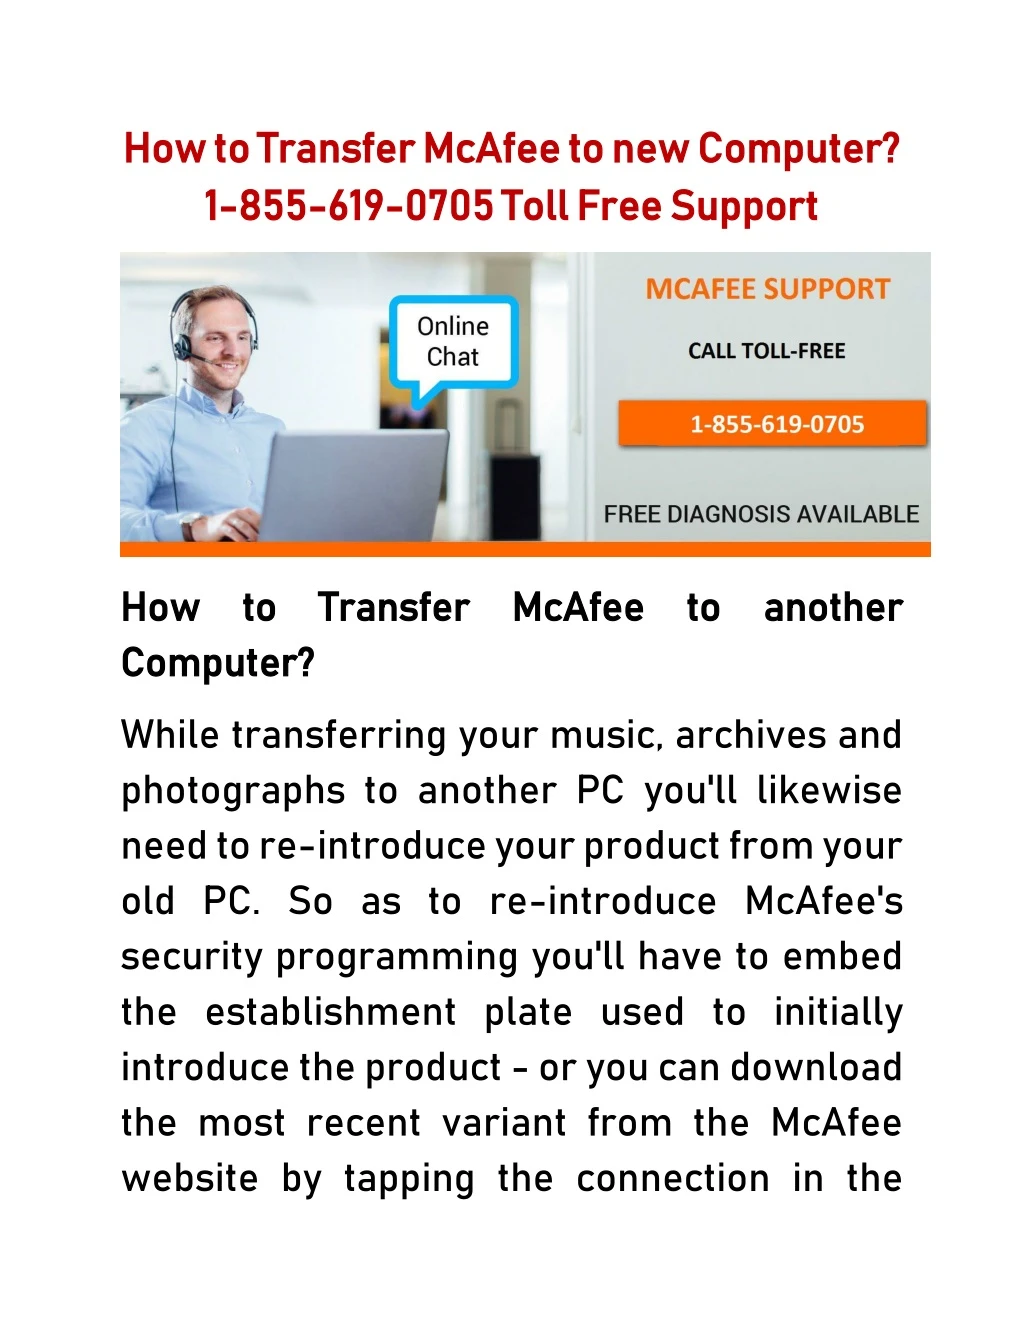 how to t how to transfer mcafee to new ransfer